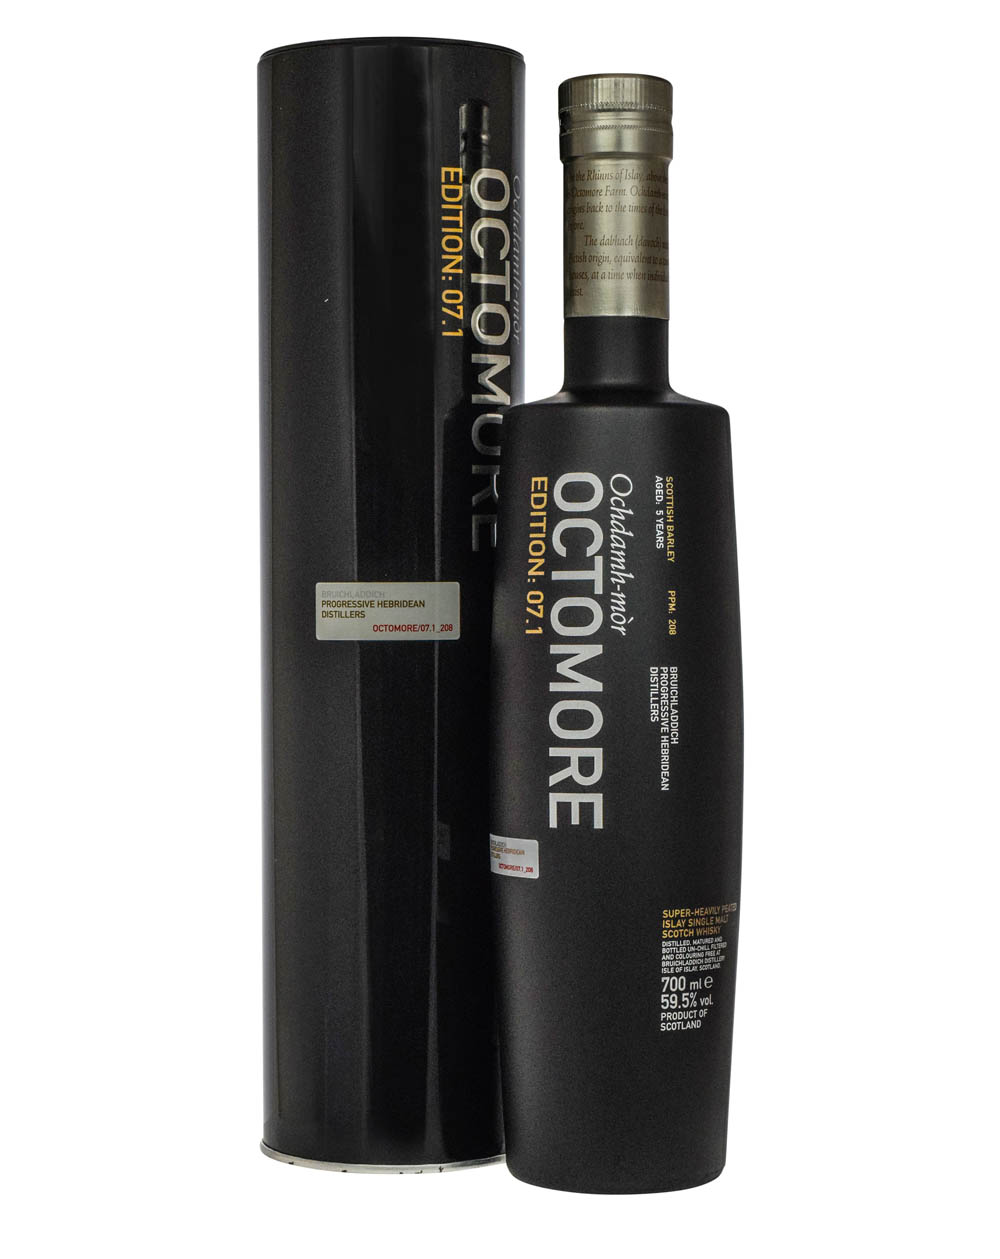 Octomore 5 Years Old Edition 07.01 Ochdamh-Mor Tube Must Have Malts MHM